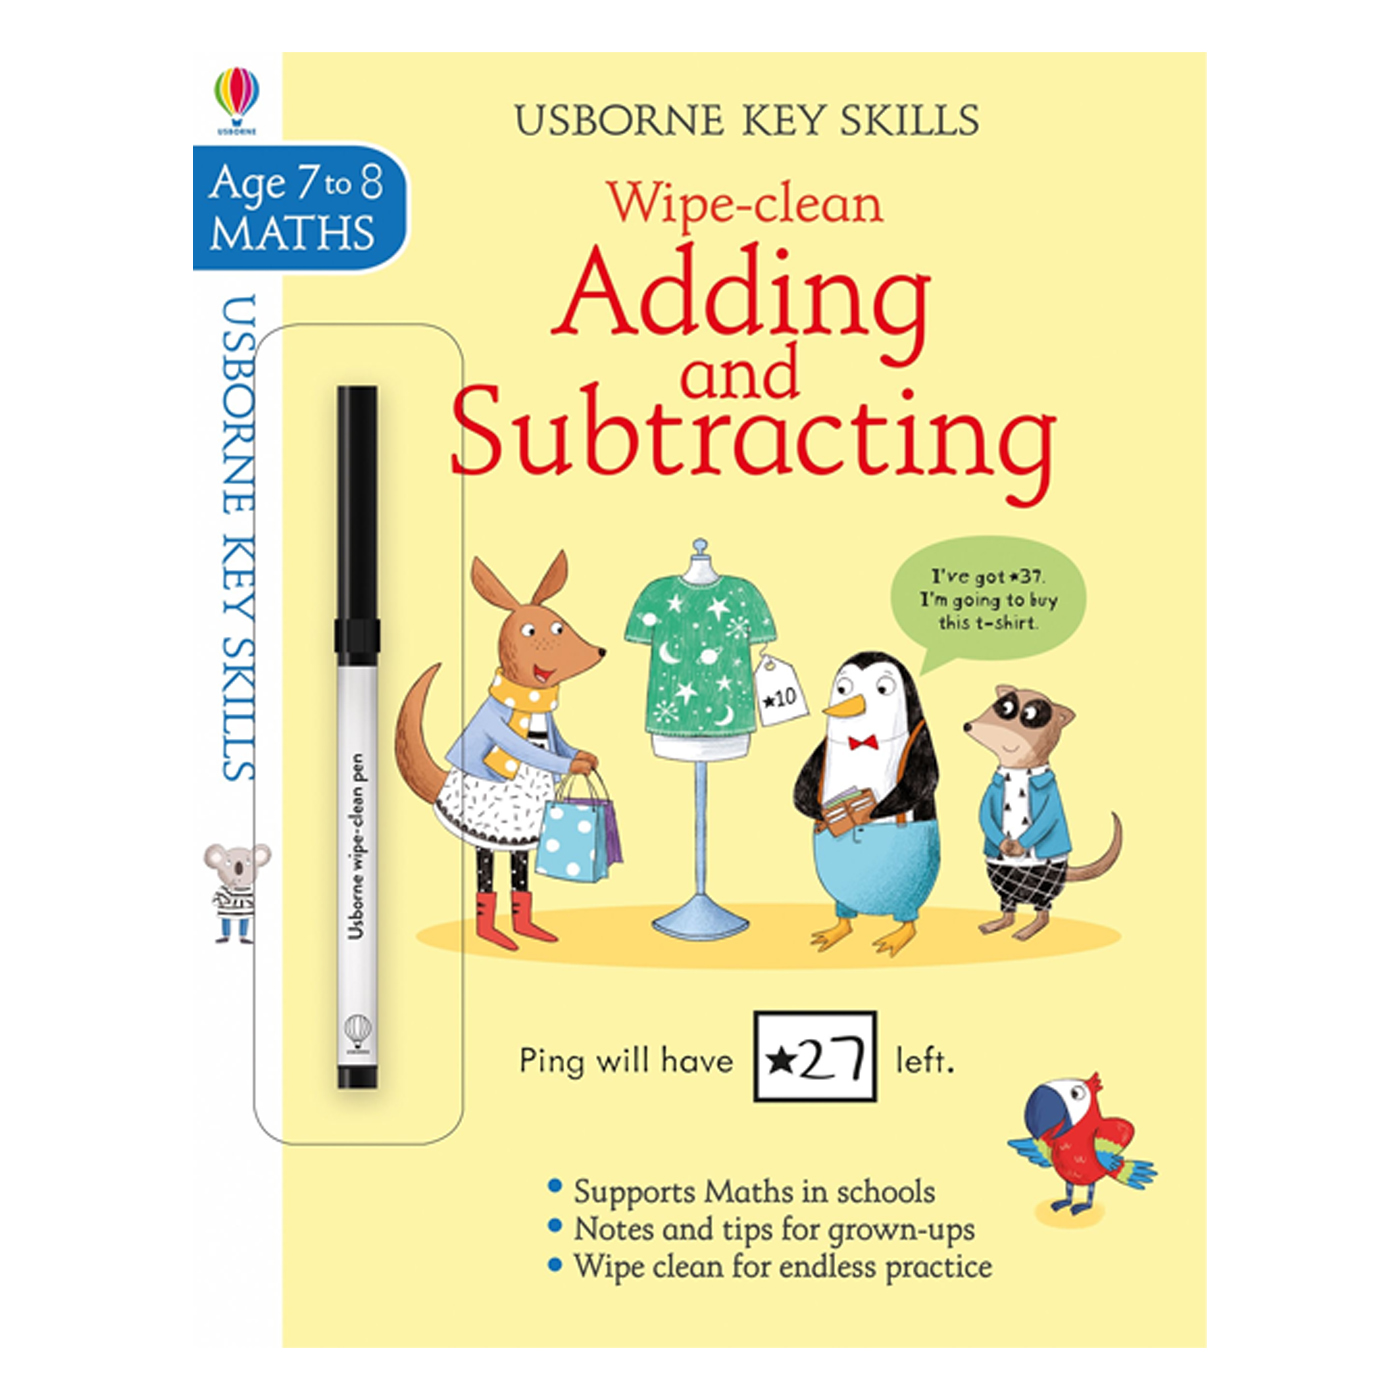  Key Skills Wipe-Clean Adding and Subtracting 7-8